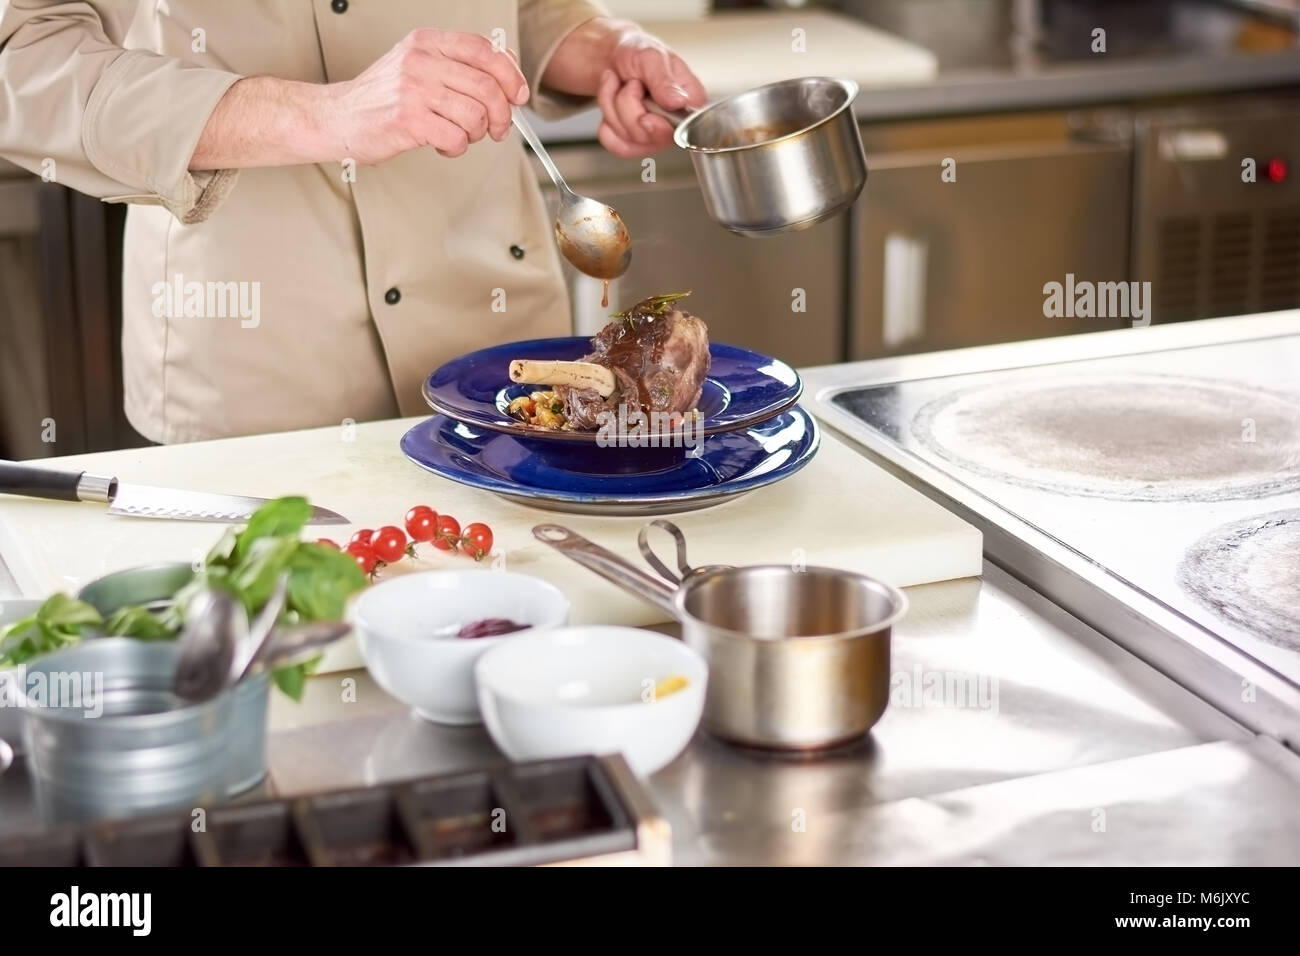 Chef pouring with sause lamb shank. Stock Photo